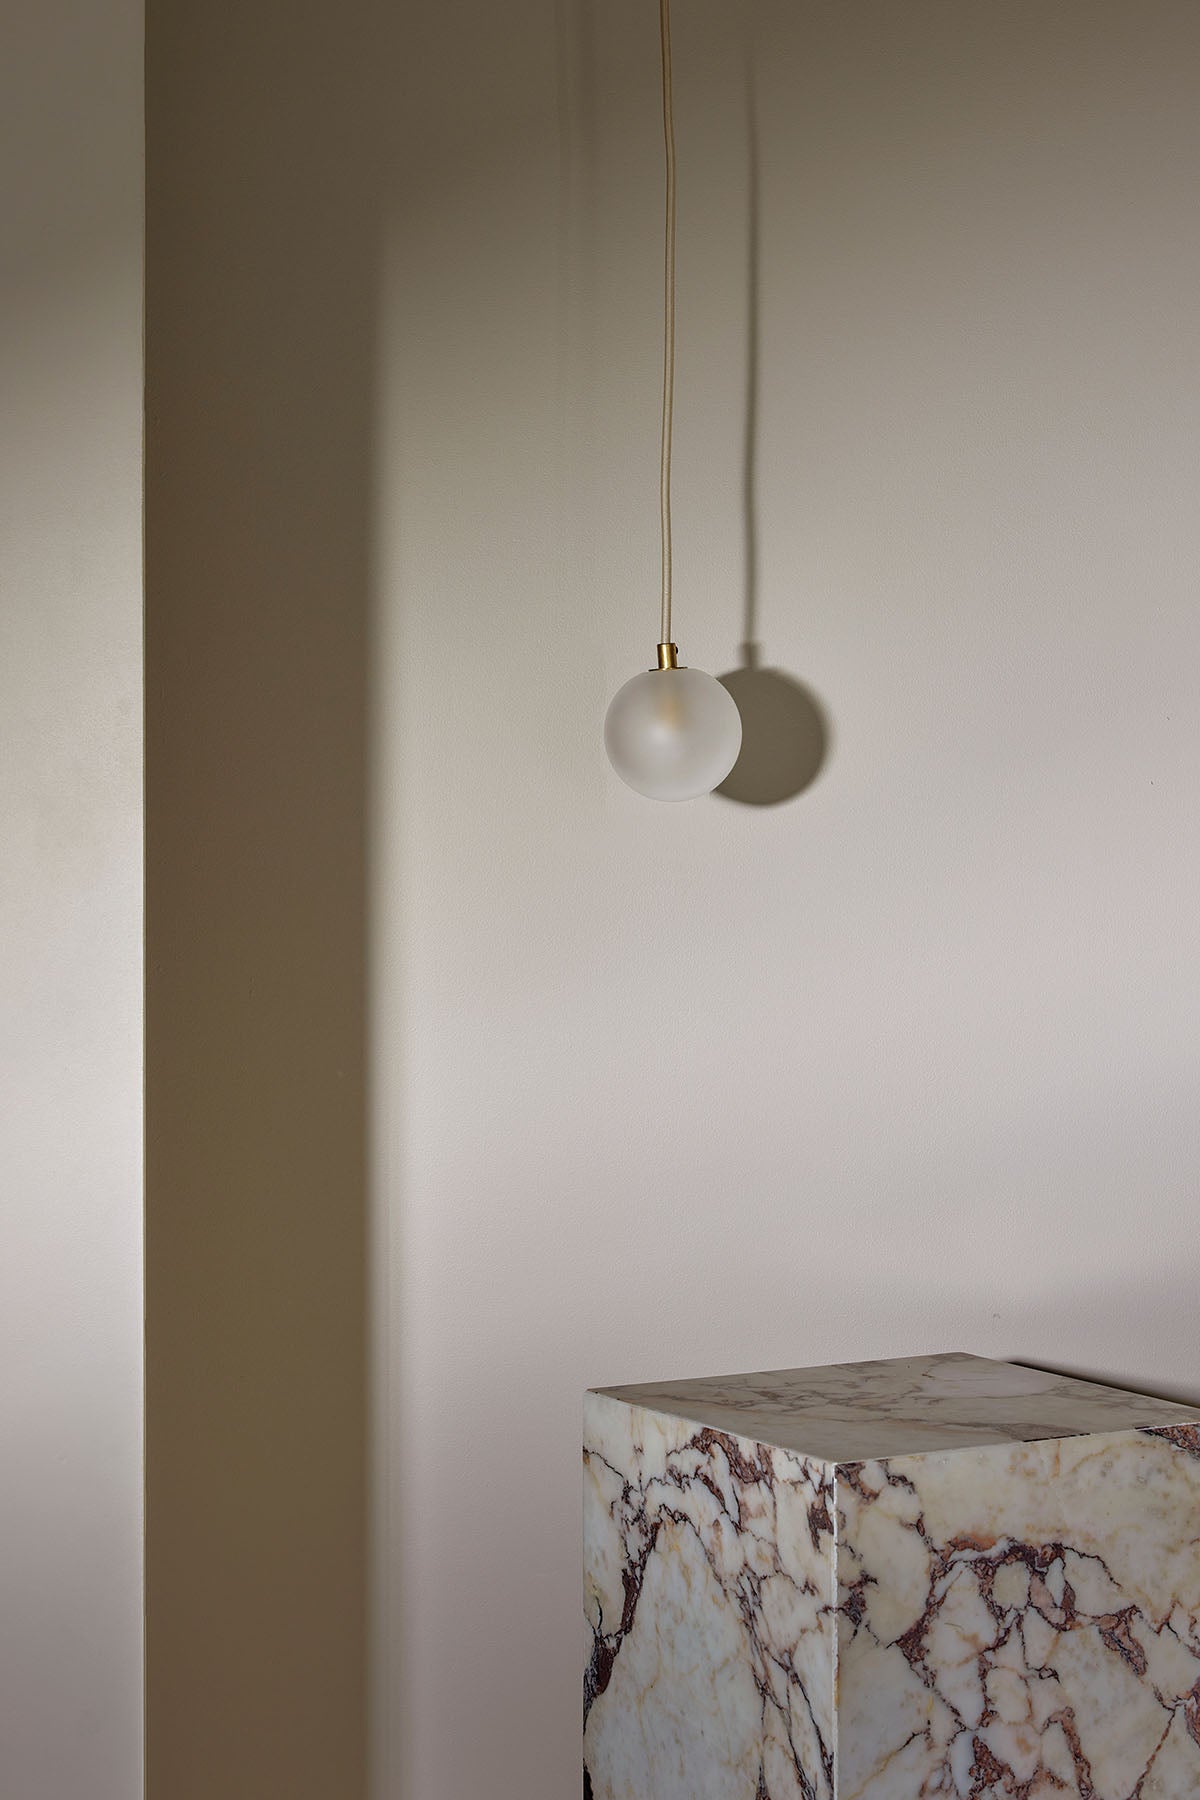 Orb Small Pendant, Solid Rod in Brass and Clear Frosted. Image by Lawrence Furzey